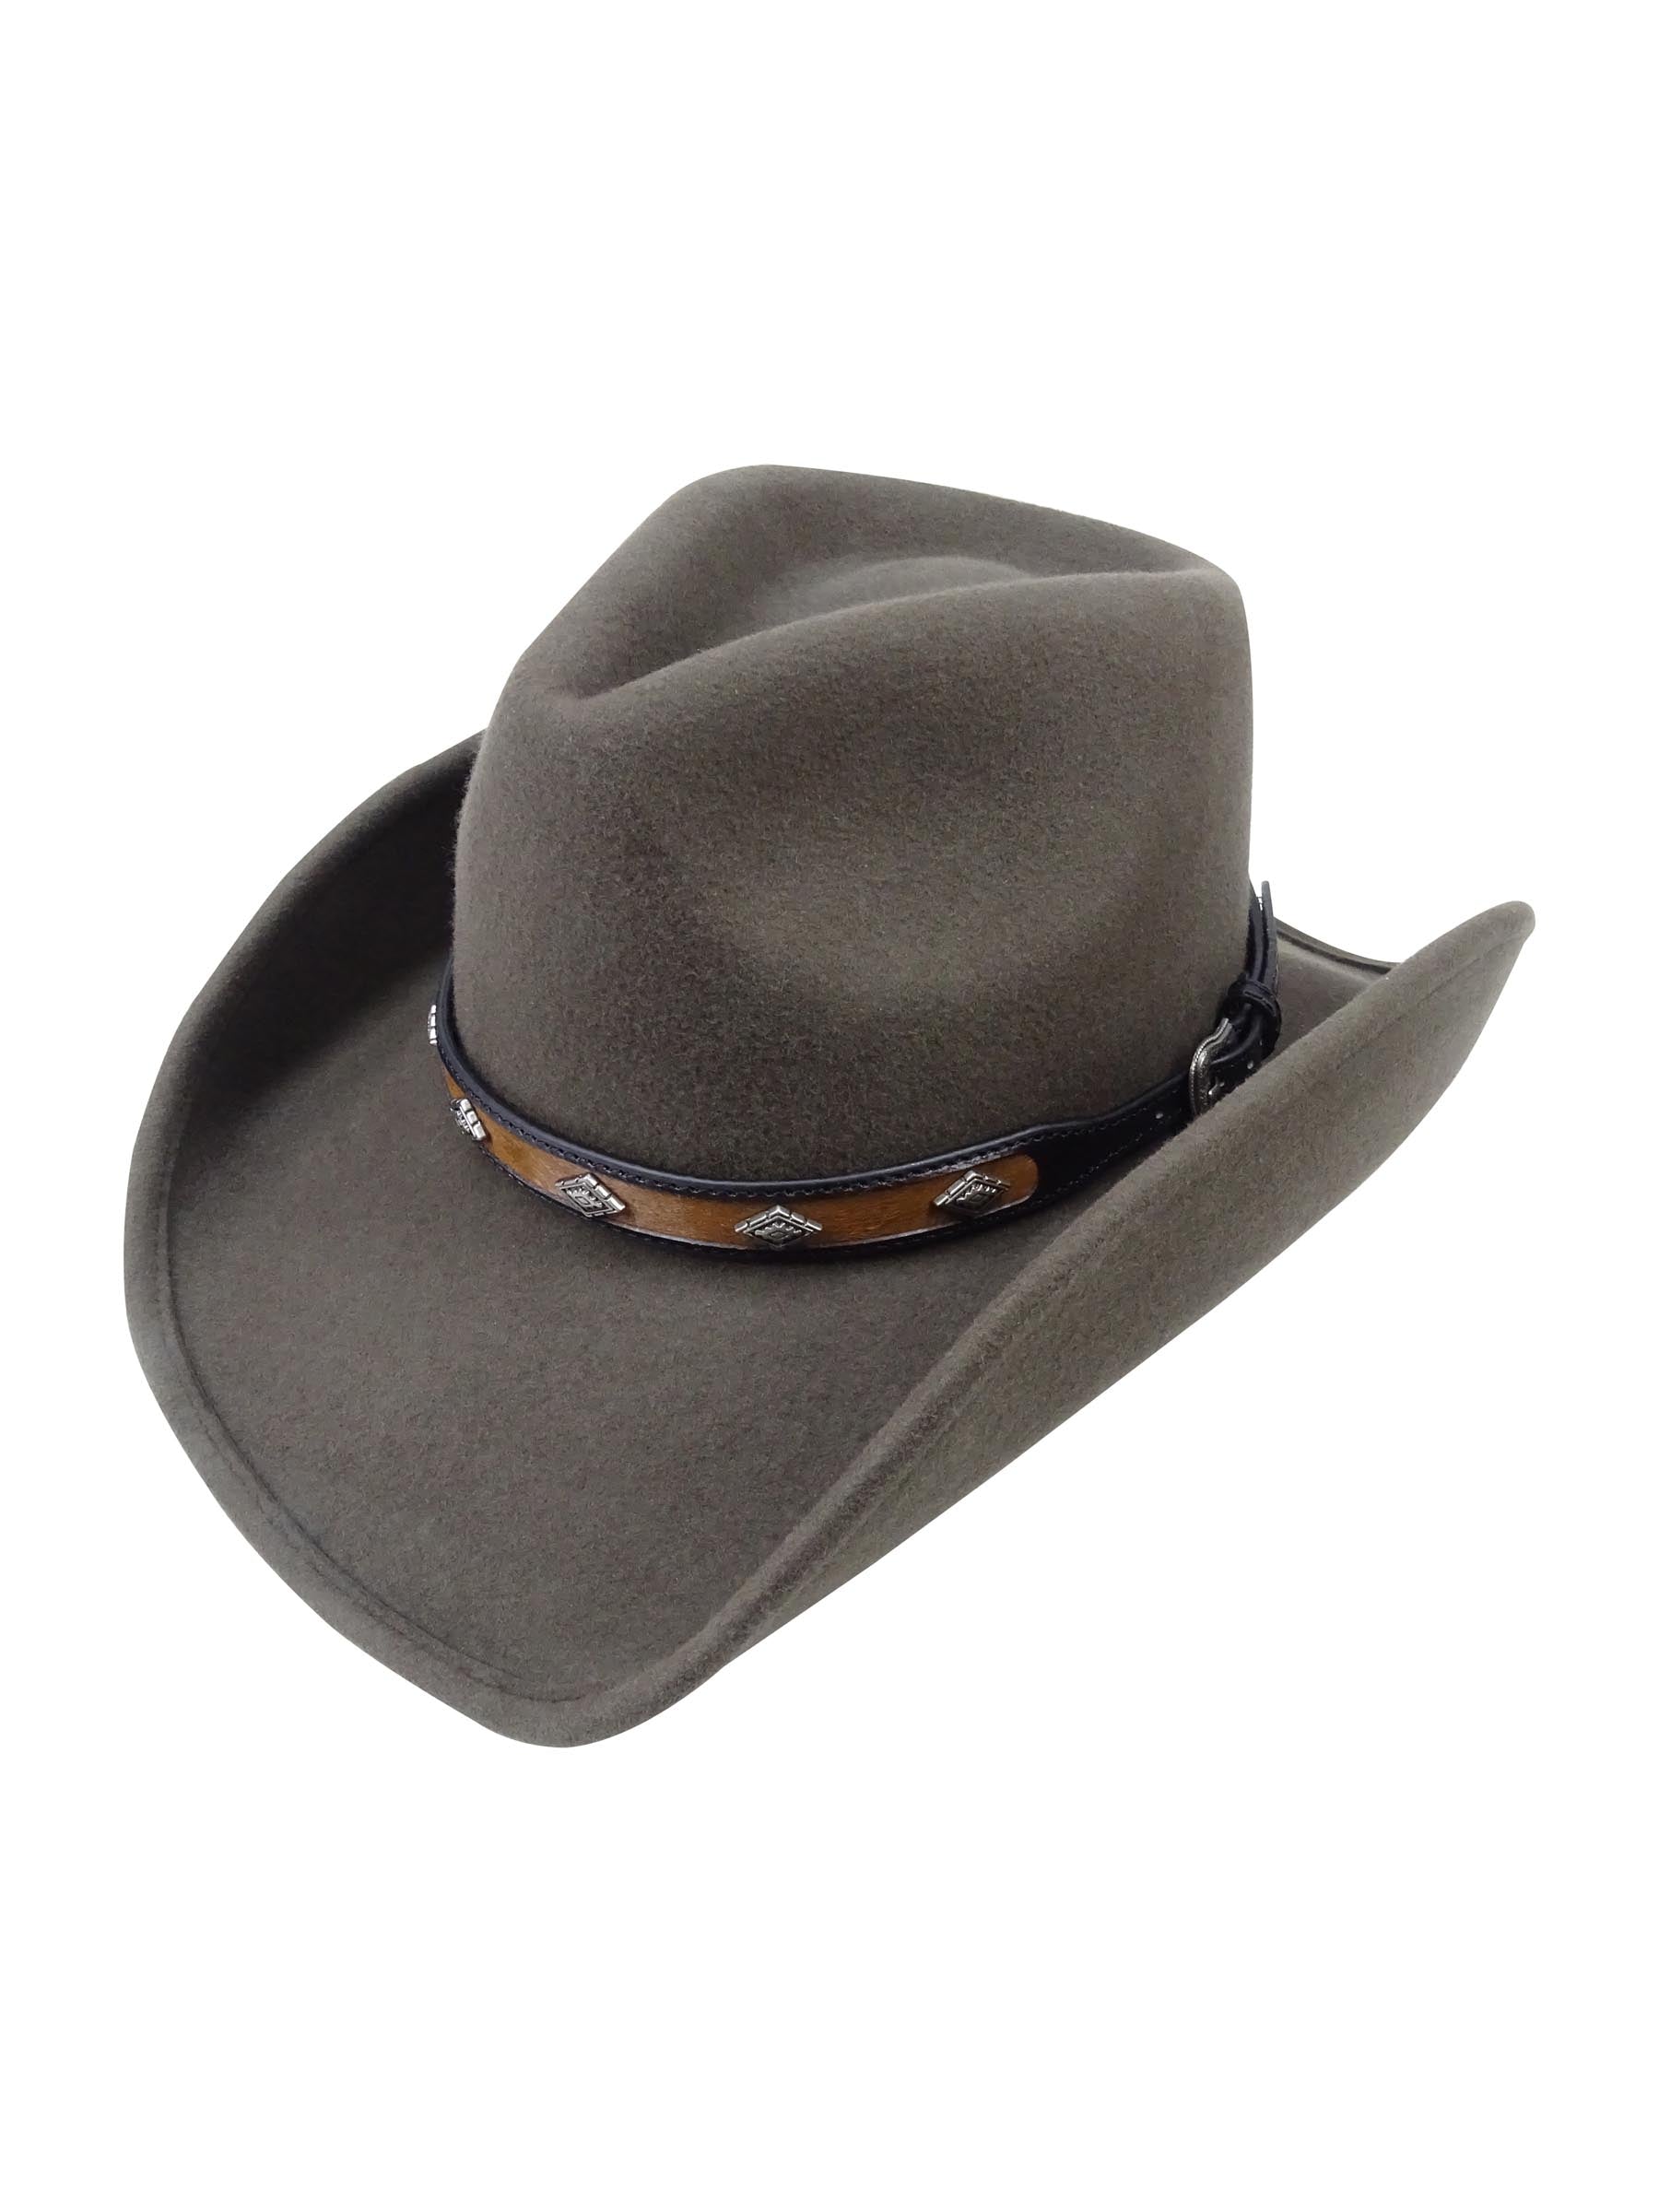 Western Hat Band for Cowboy Hats by Silver Canyon, Brown Leather with –  Silver Canyon Boot and Clothing Company